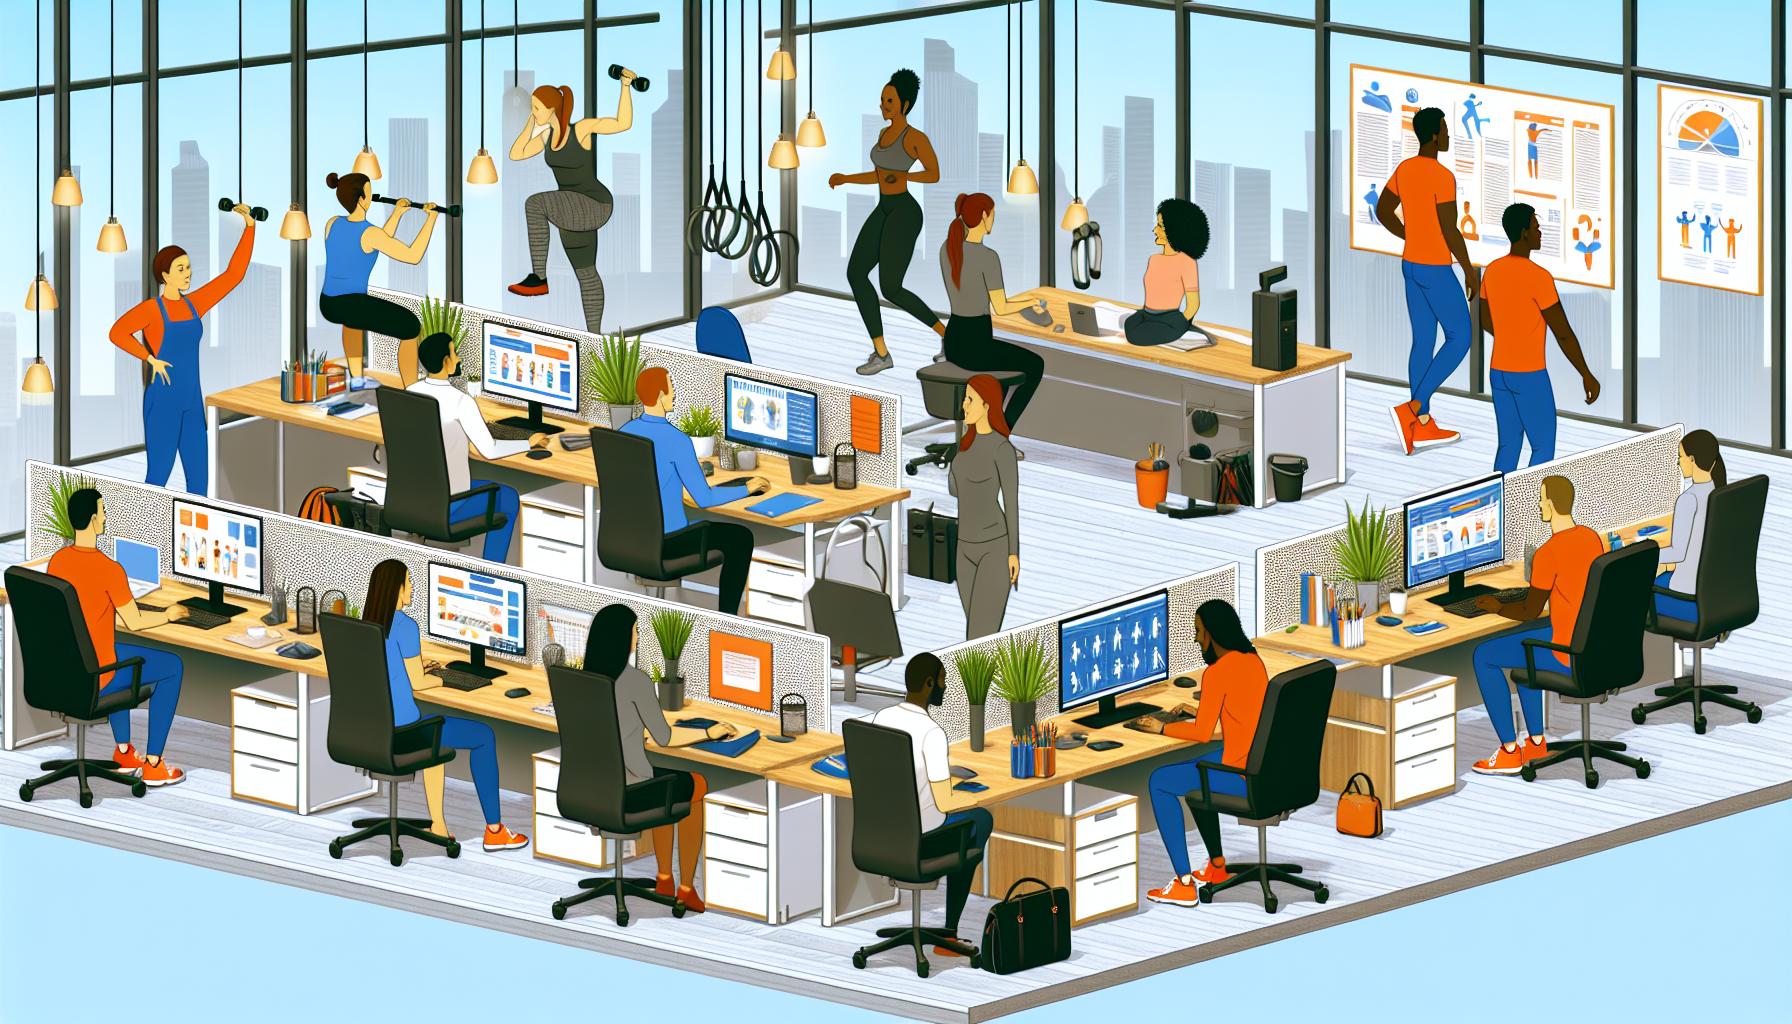 An image of a modern office space with employees working at their desks, some participating in a fitness challenge, and others accessing wellness reso